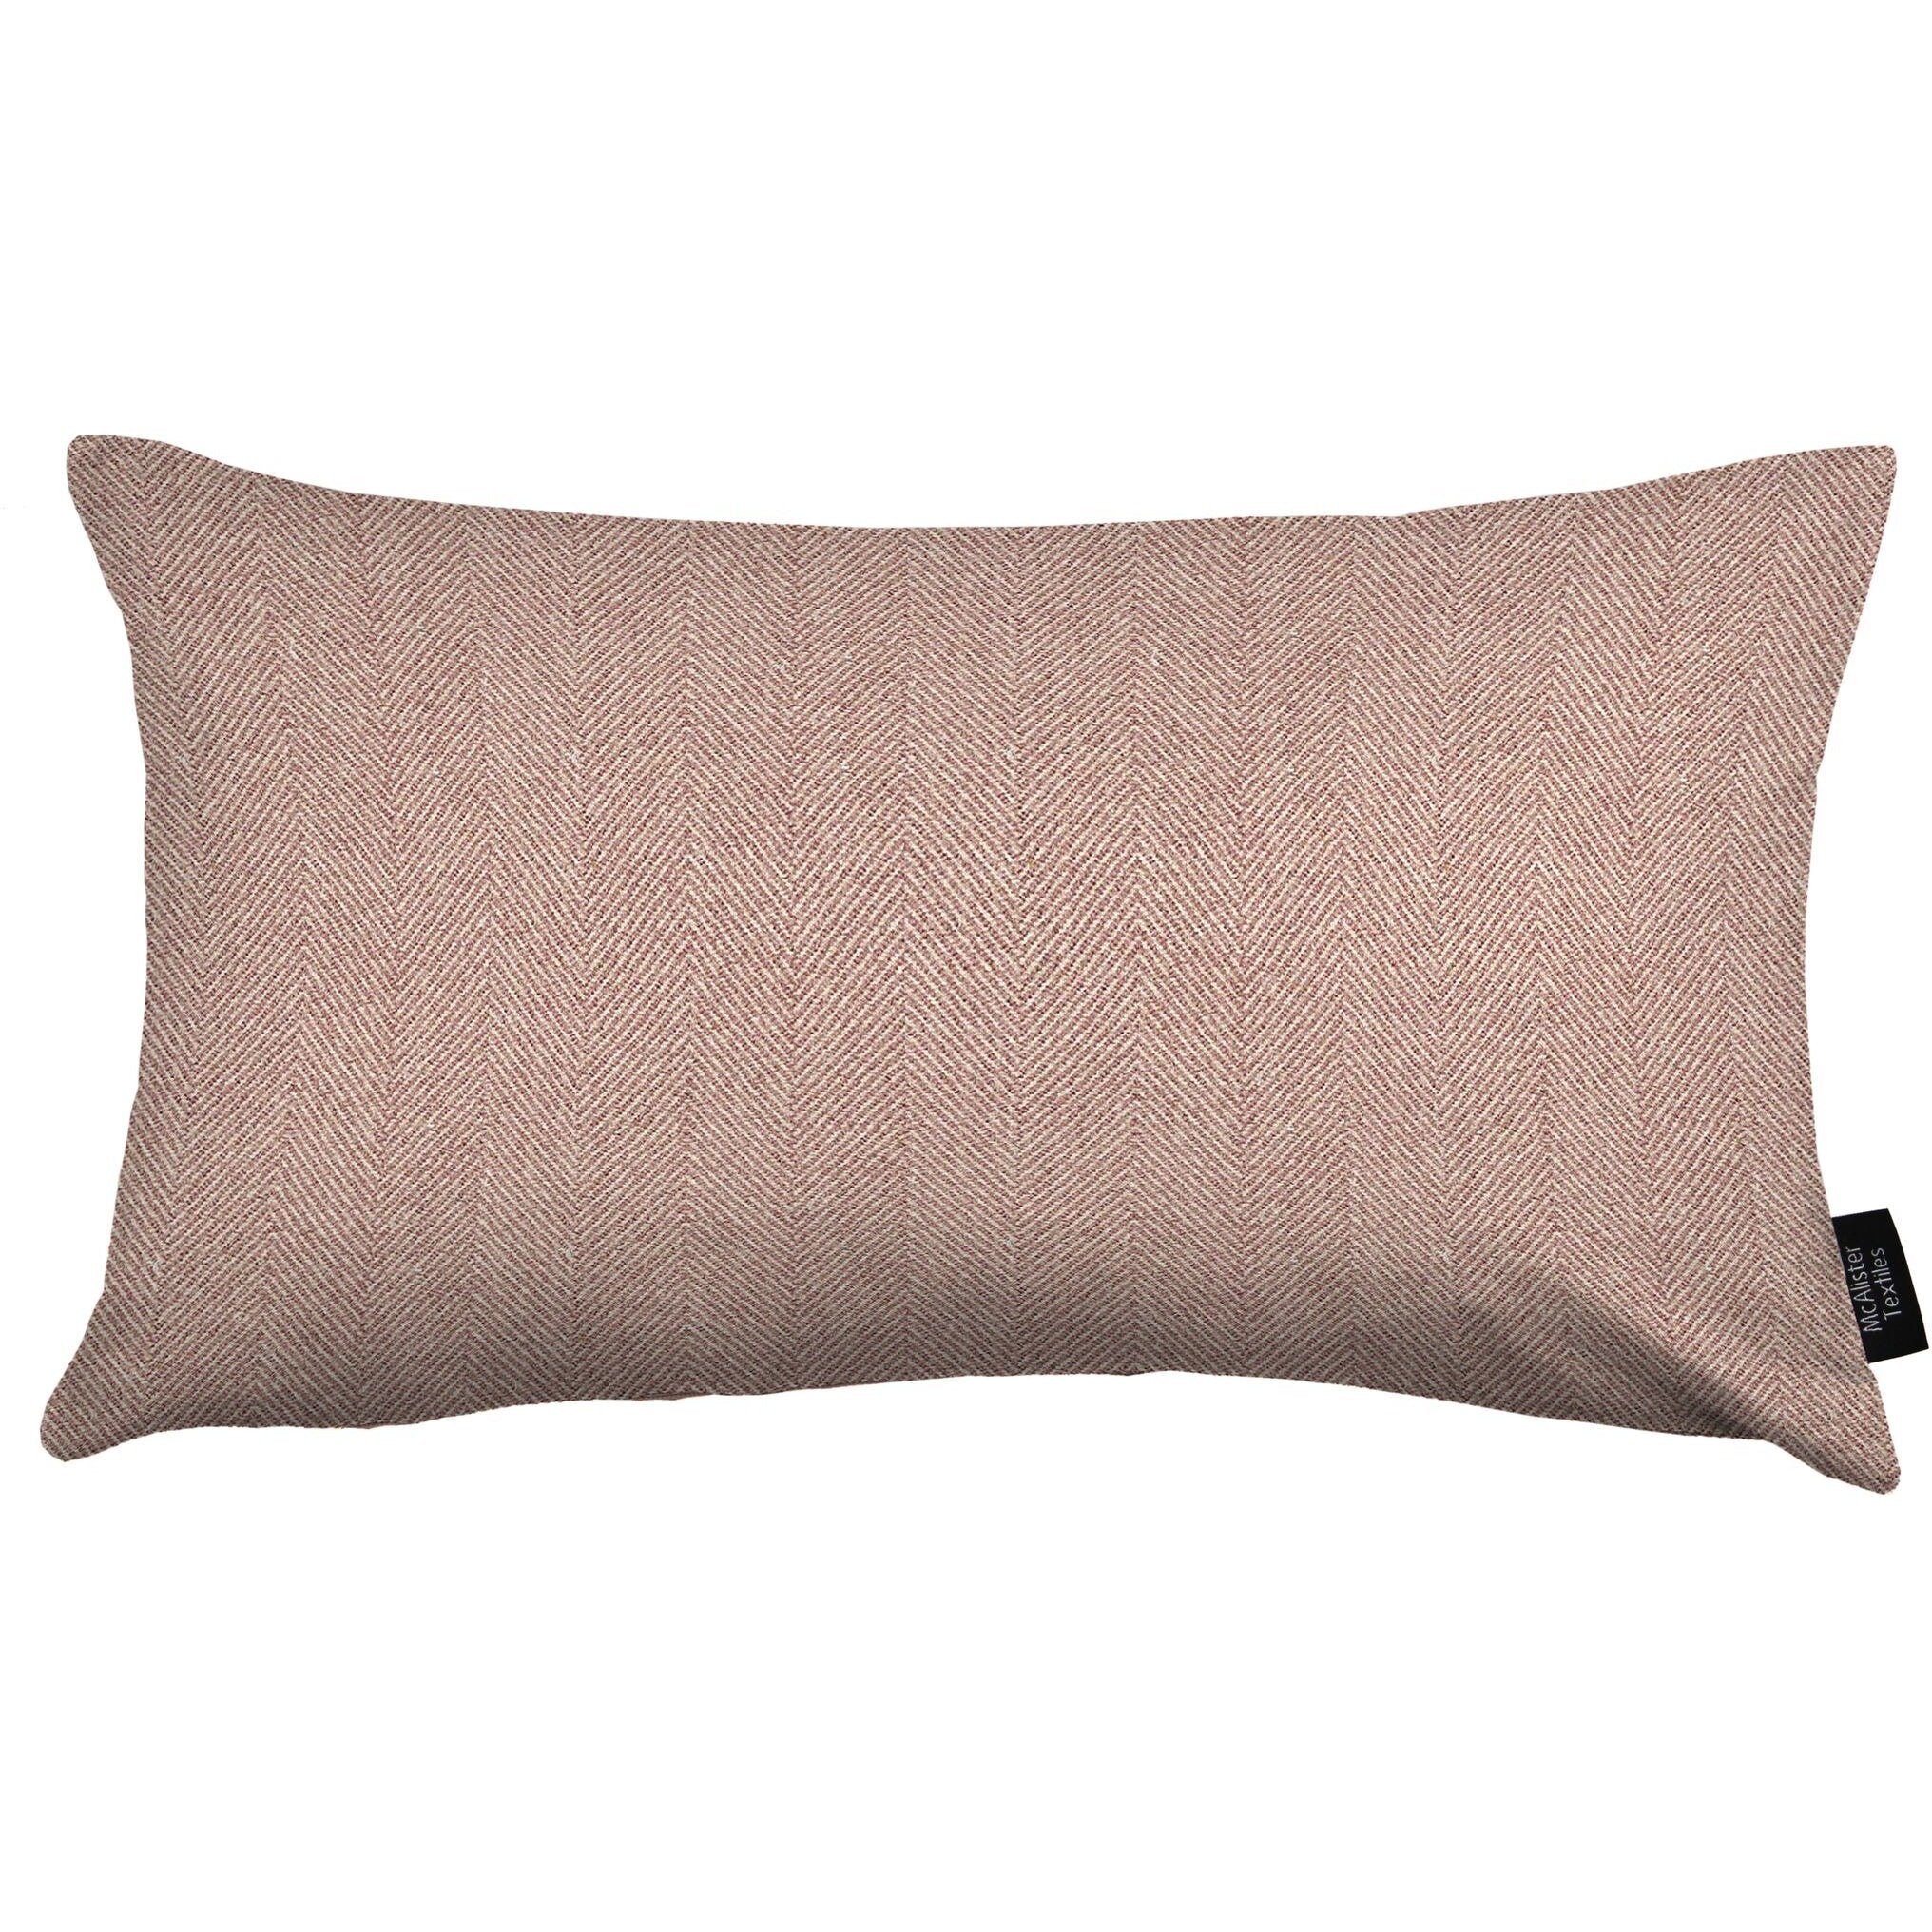 McAlister Textiles Herringbone Lilac Purple Cushion Cushions and Covers Cover Only 50cm x 30cm 